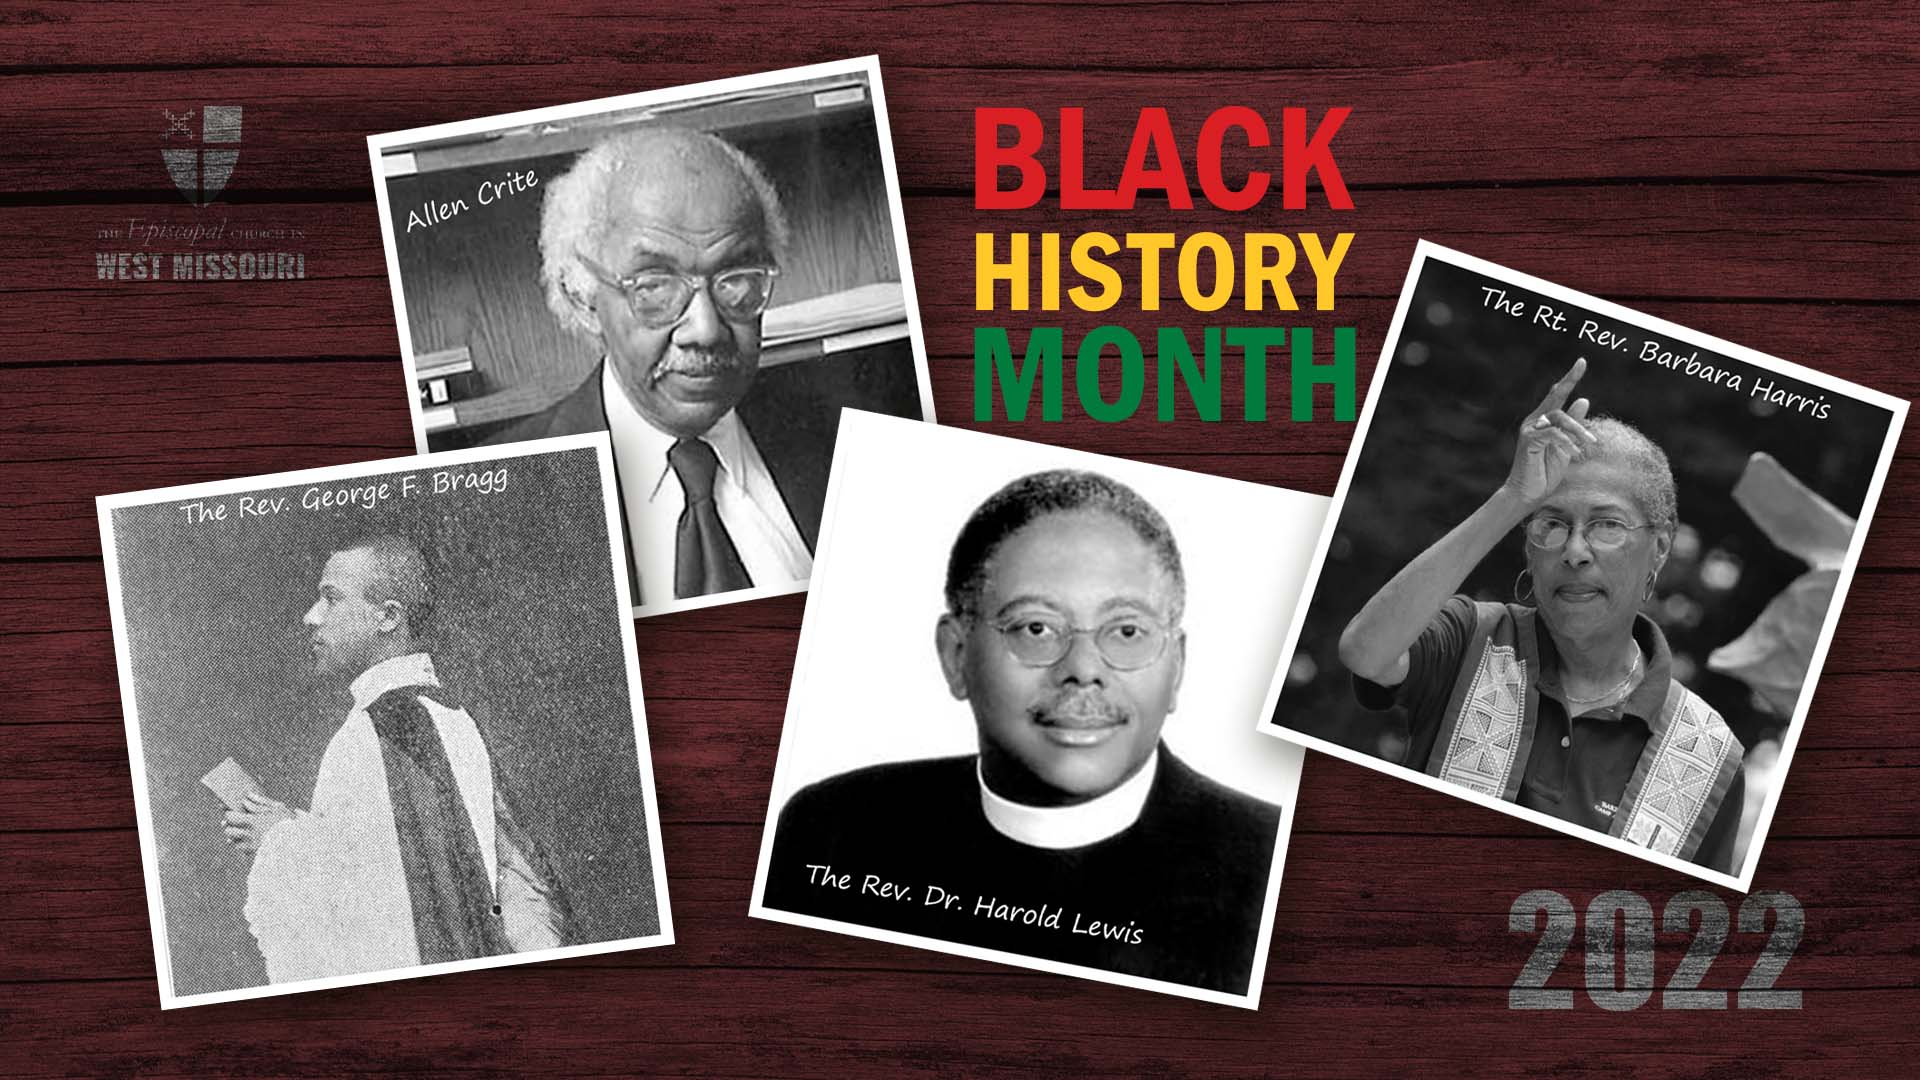 Diocesan Diversity and Reconciliation Commission to release a new series of four videos during Black History Month